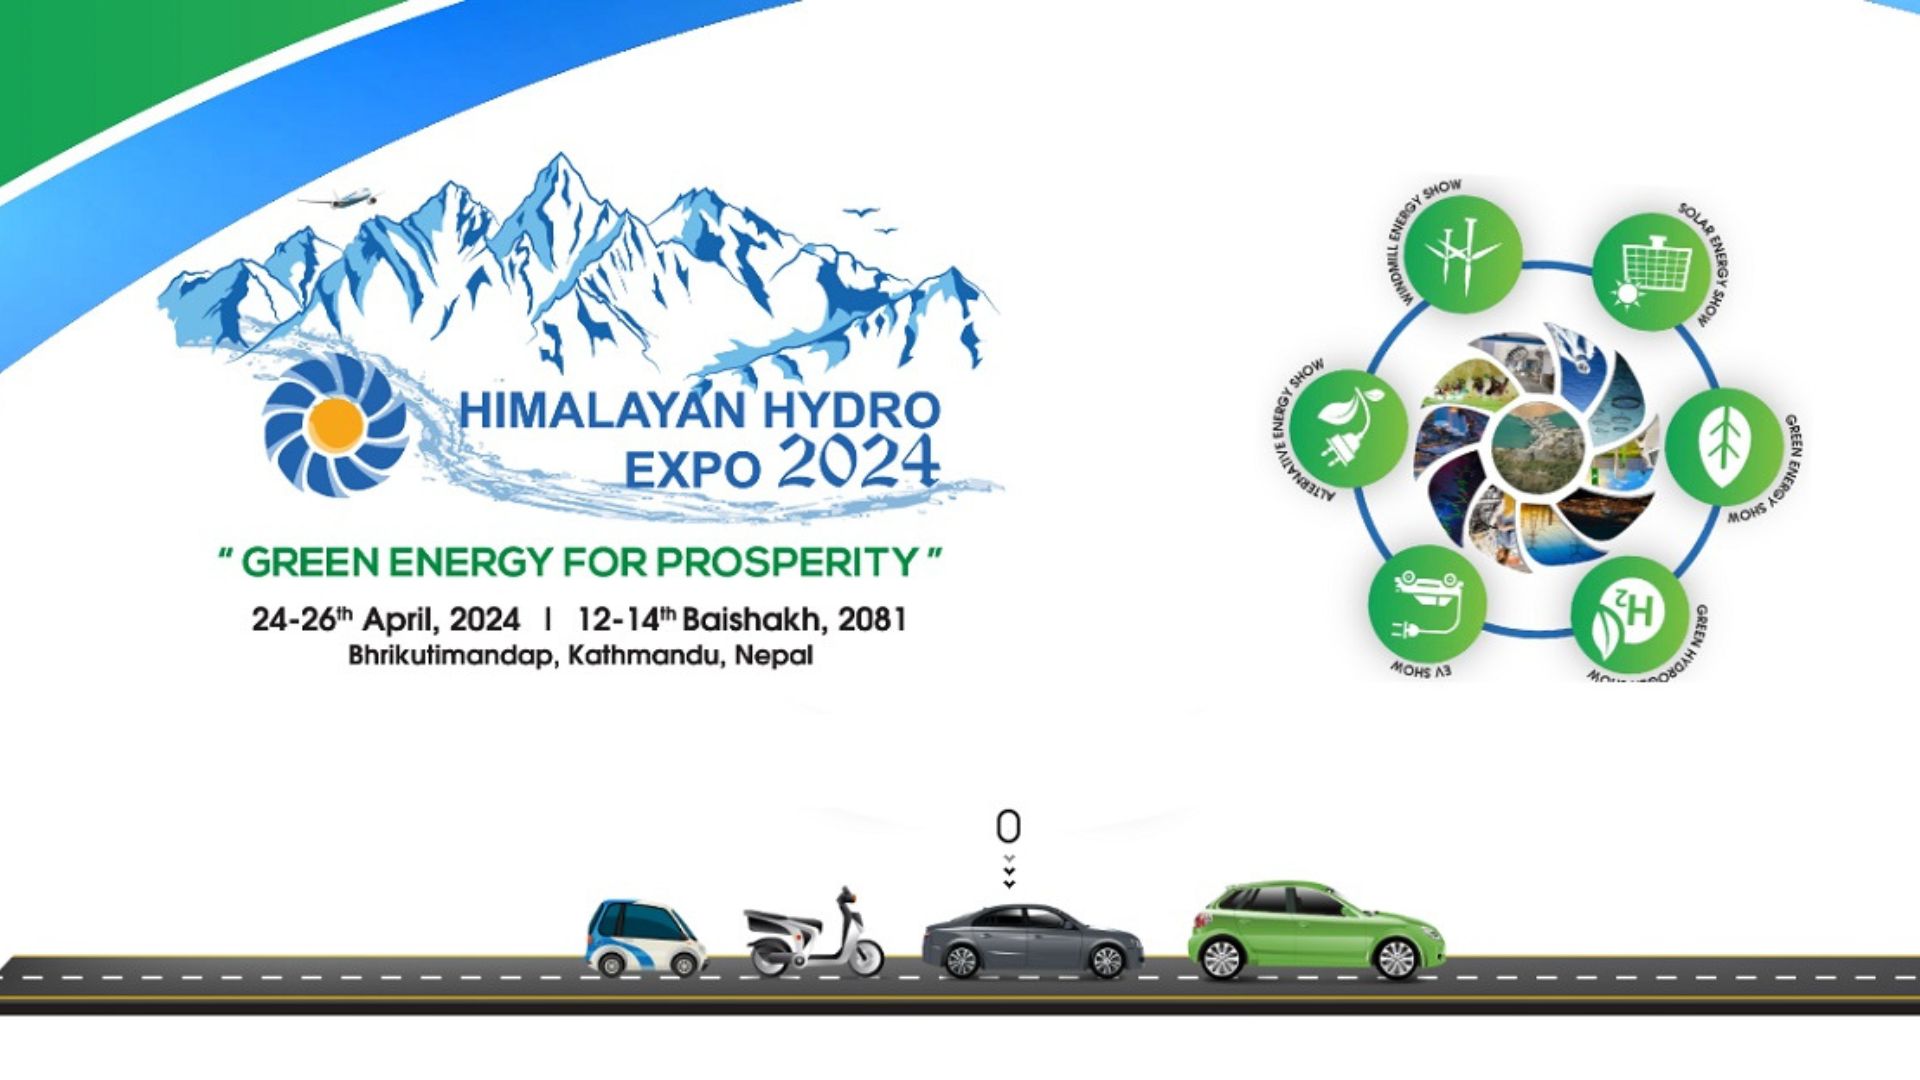 Preparations for the Himalayan Hydro Expo are in the final stage